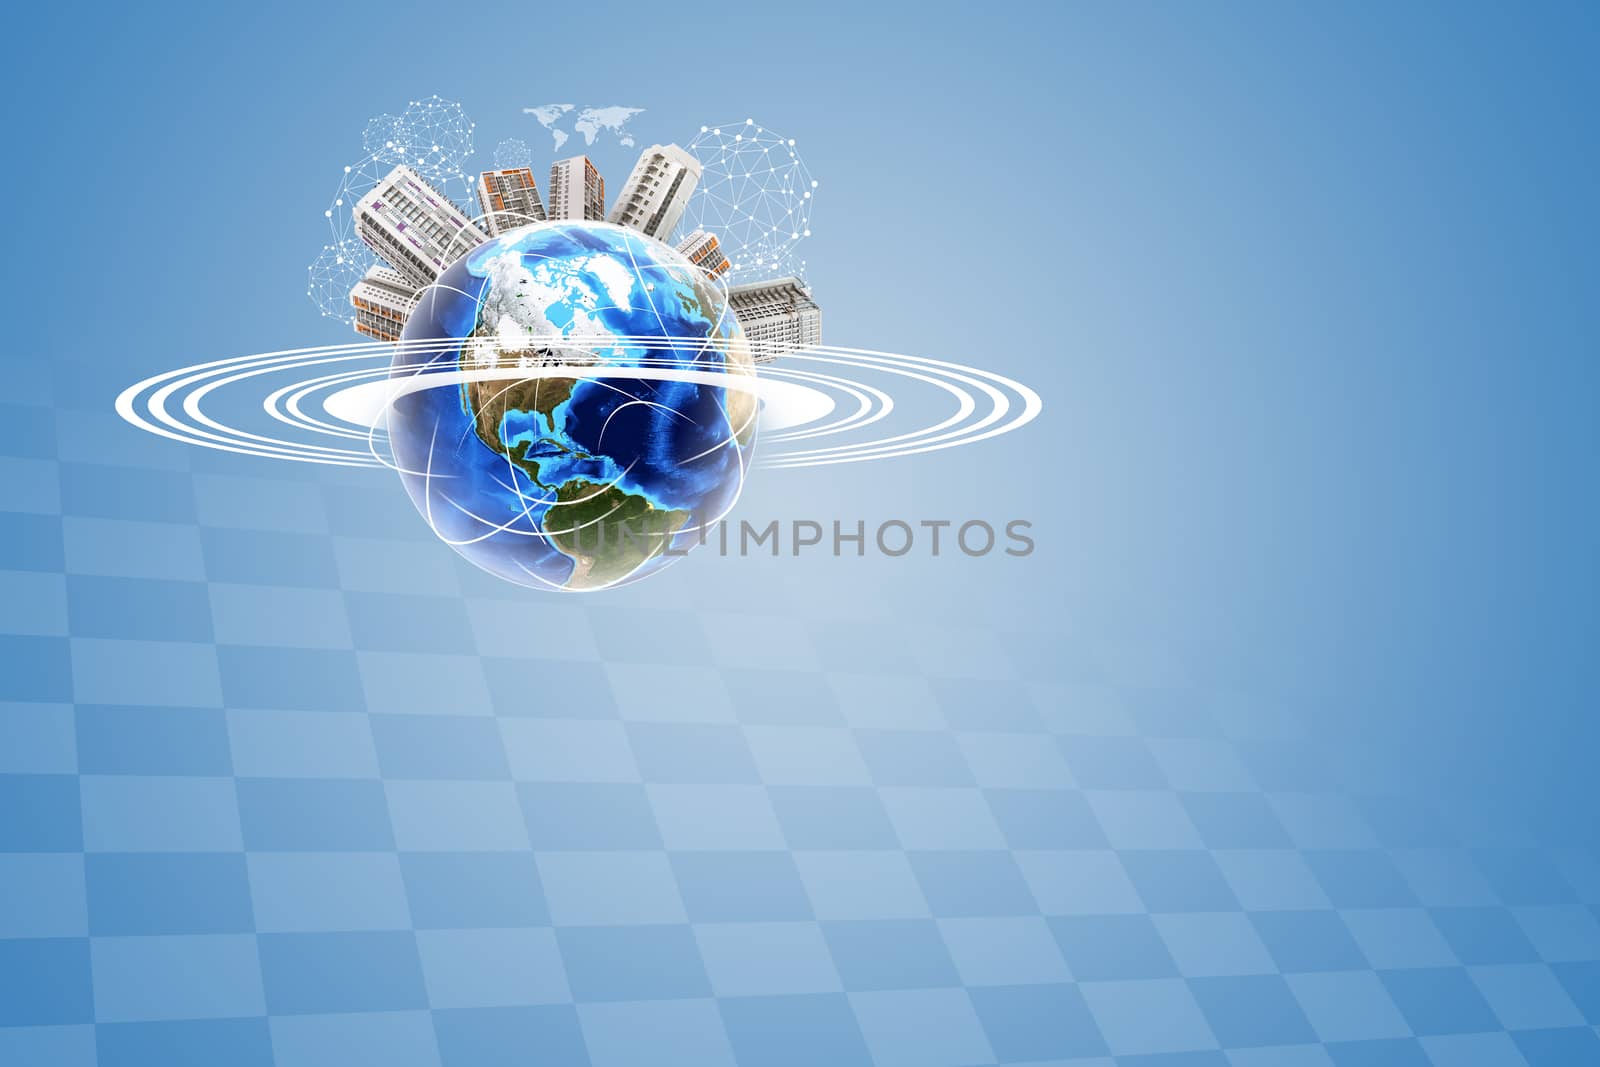 Earth with buildings and wire-frame spheres on blue background. Element of this image furnished by NASA